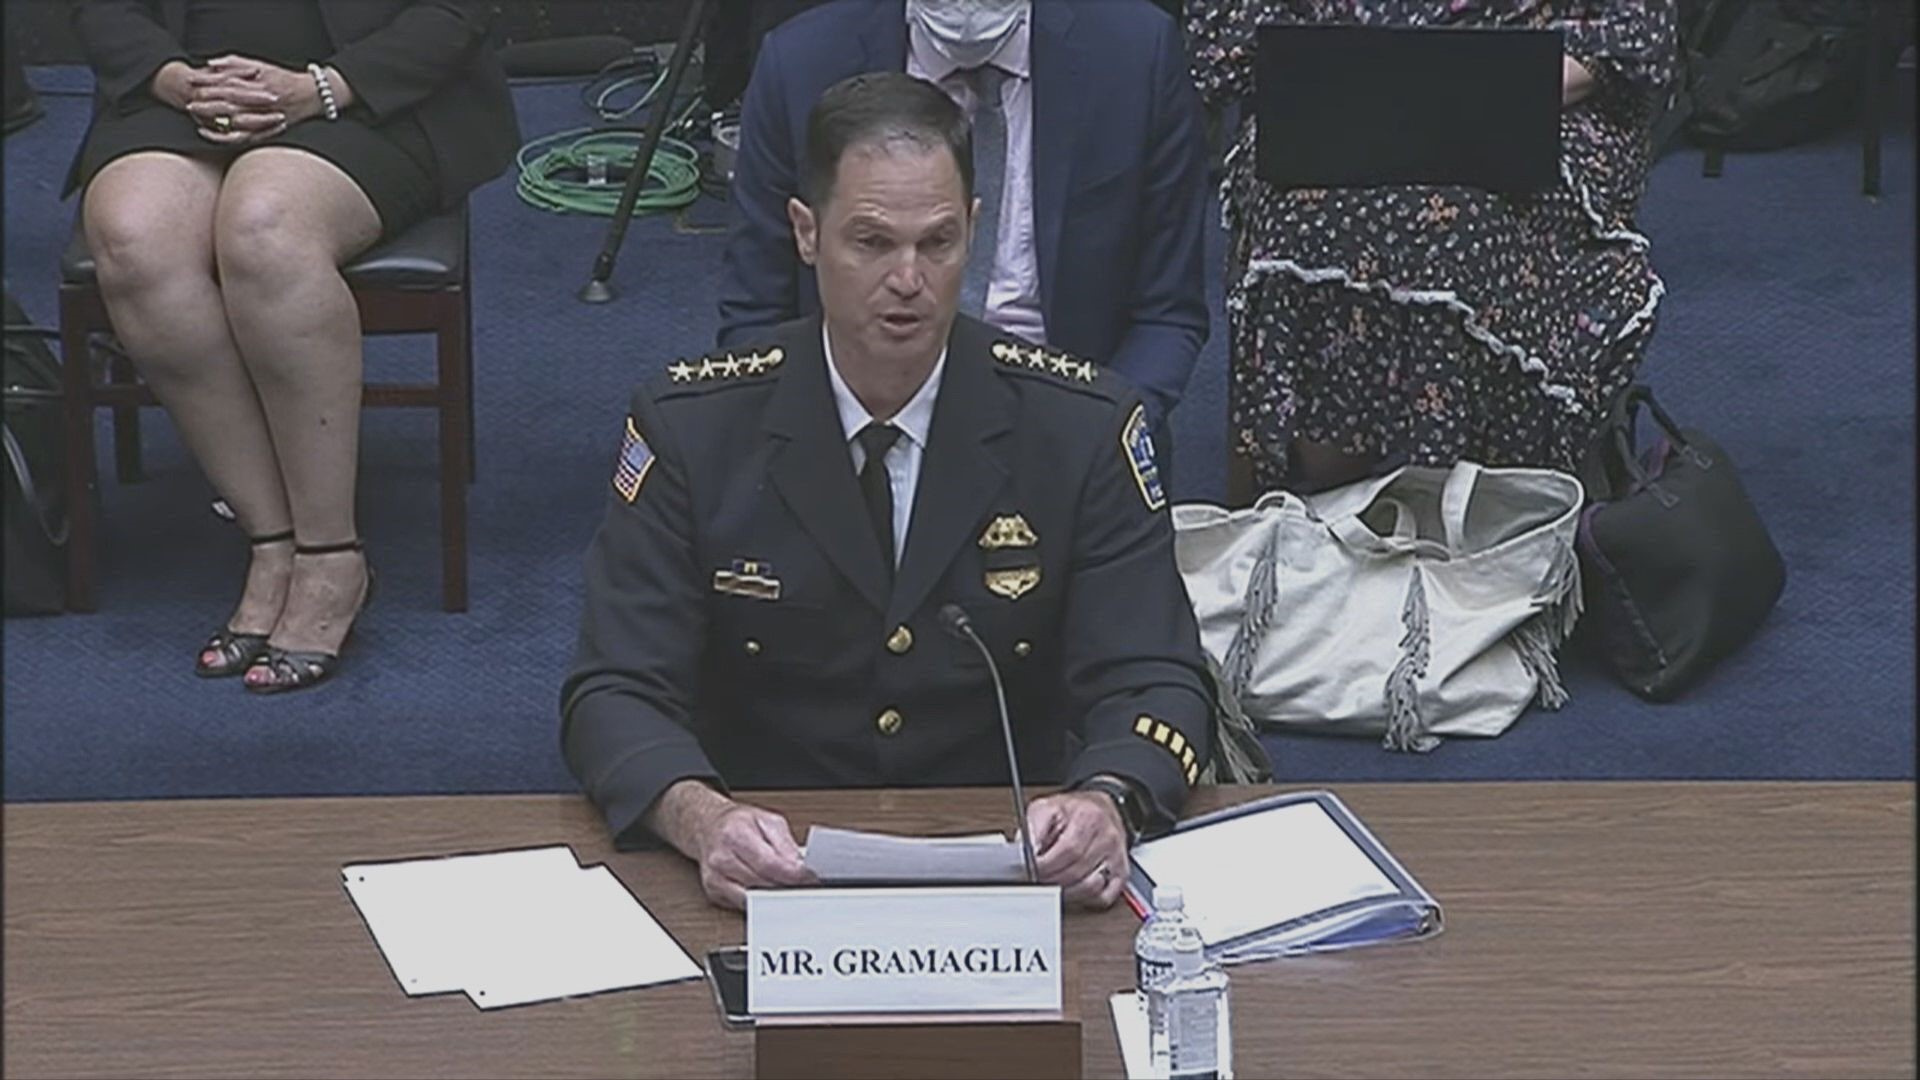 Buffalo Police Commissioner testifies in front of House Oversight Committee regarding gun violence following mass shooting in Buffalo on May 14.